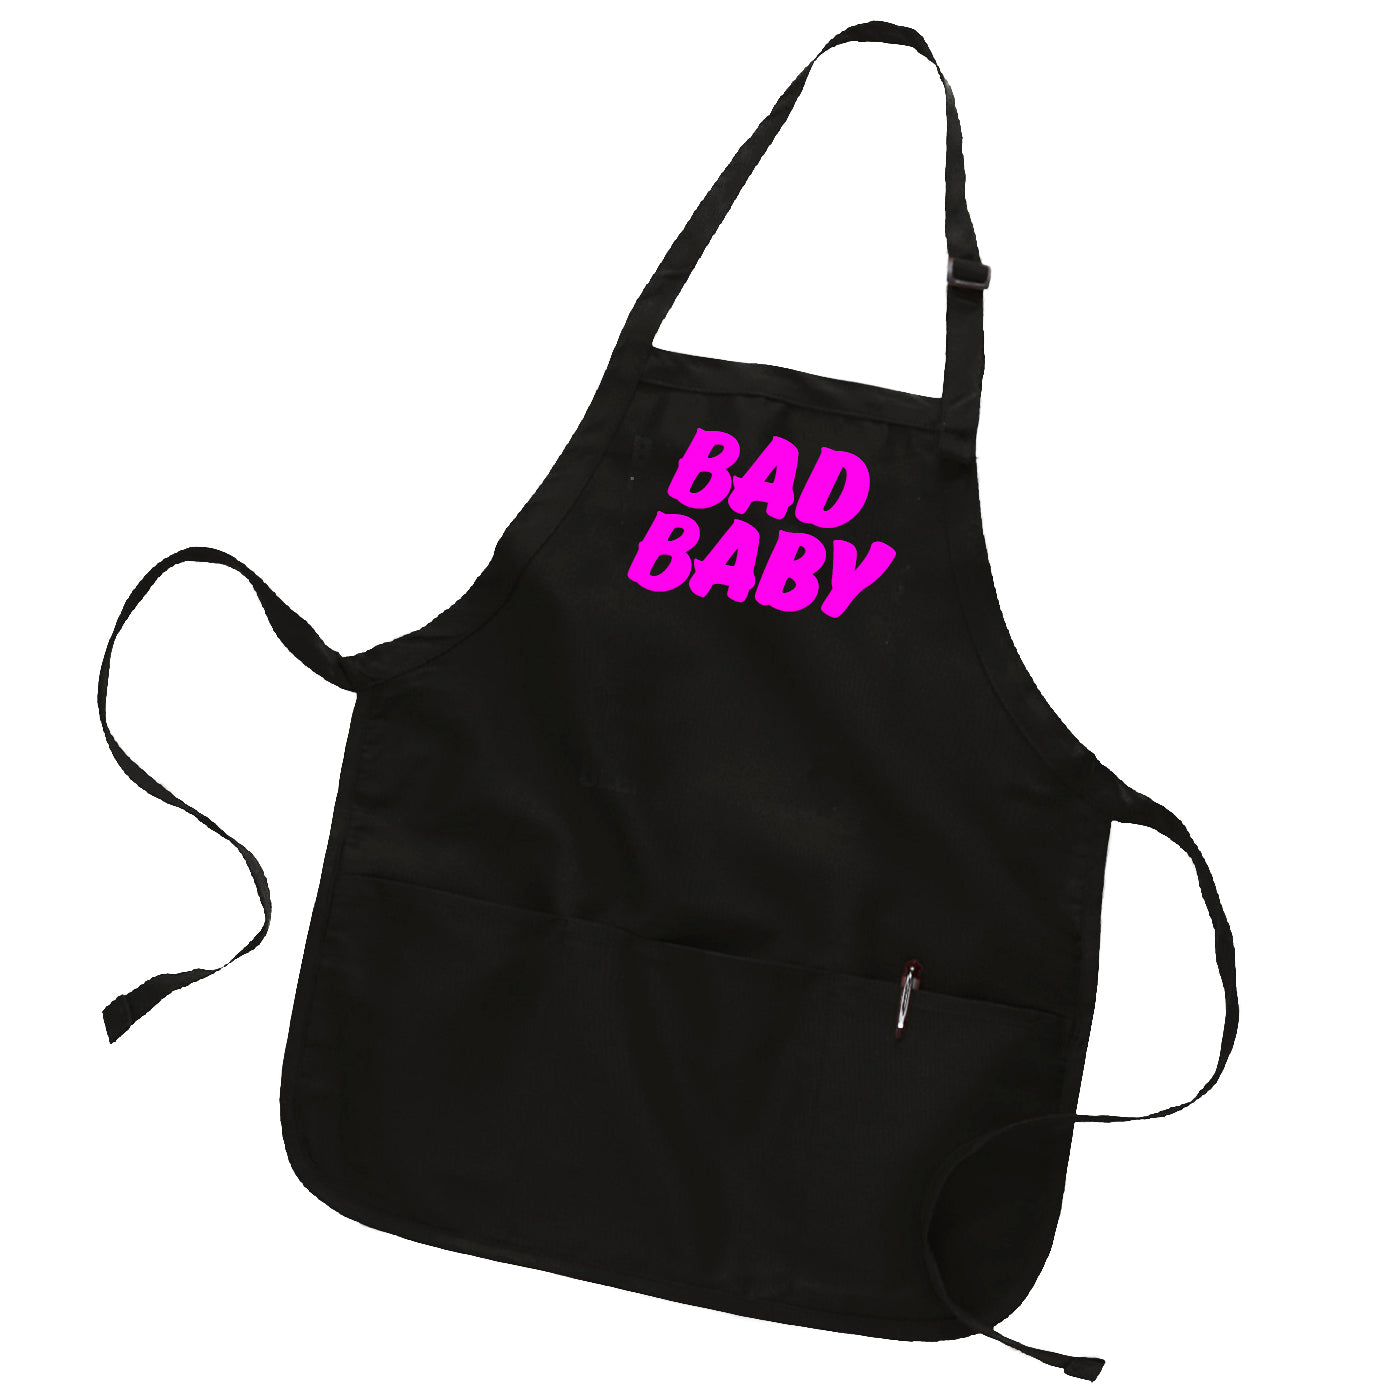 Black baker-style apron with custom text "Bad Baby" in neon pink brush text